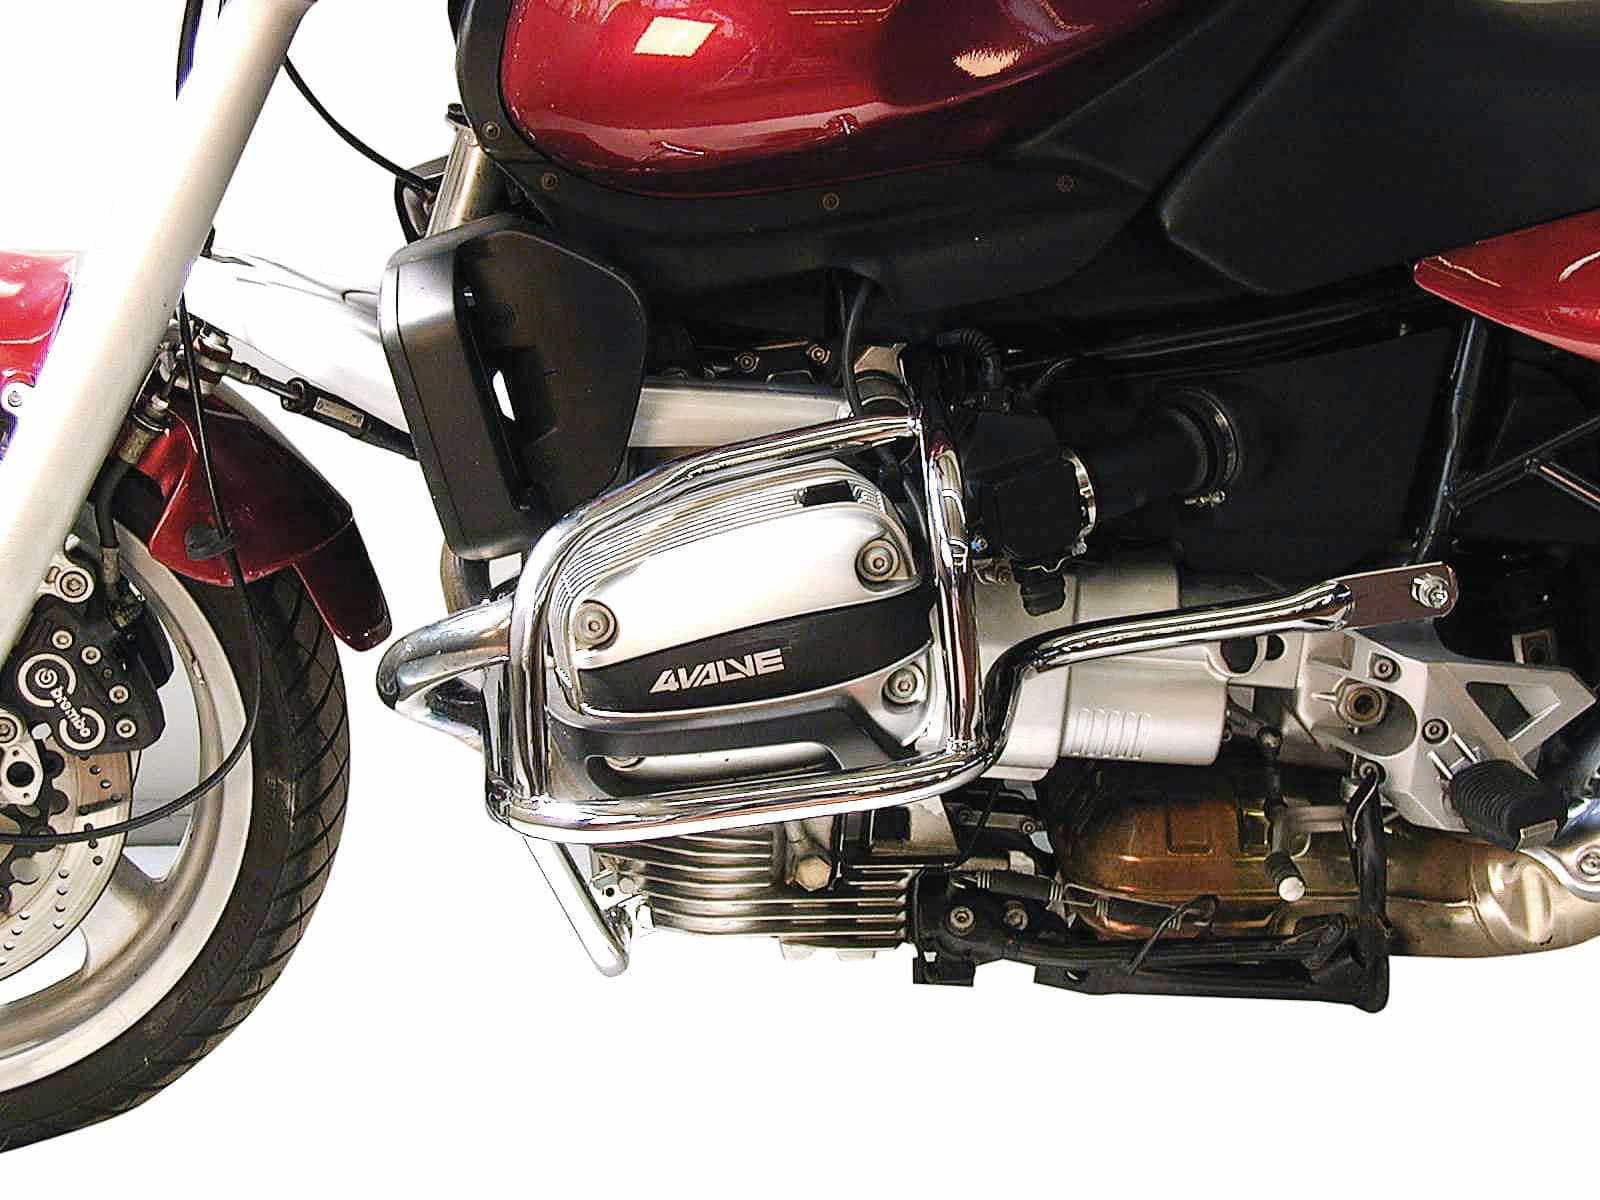 Engine protection bar chrome for BMW R 850 R (1994-2002)/R 1100 R (1994-1999) (Please indicate year of construction.)